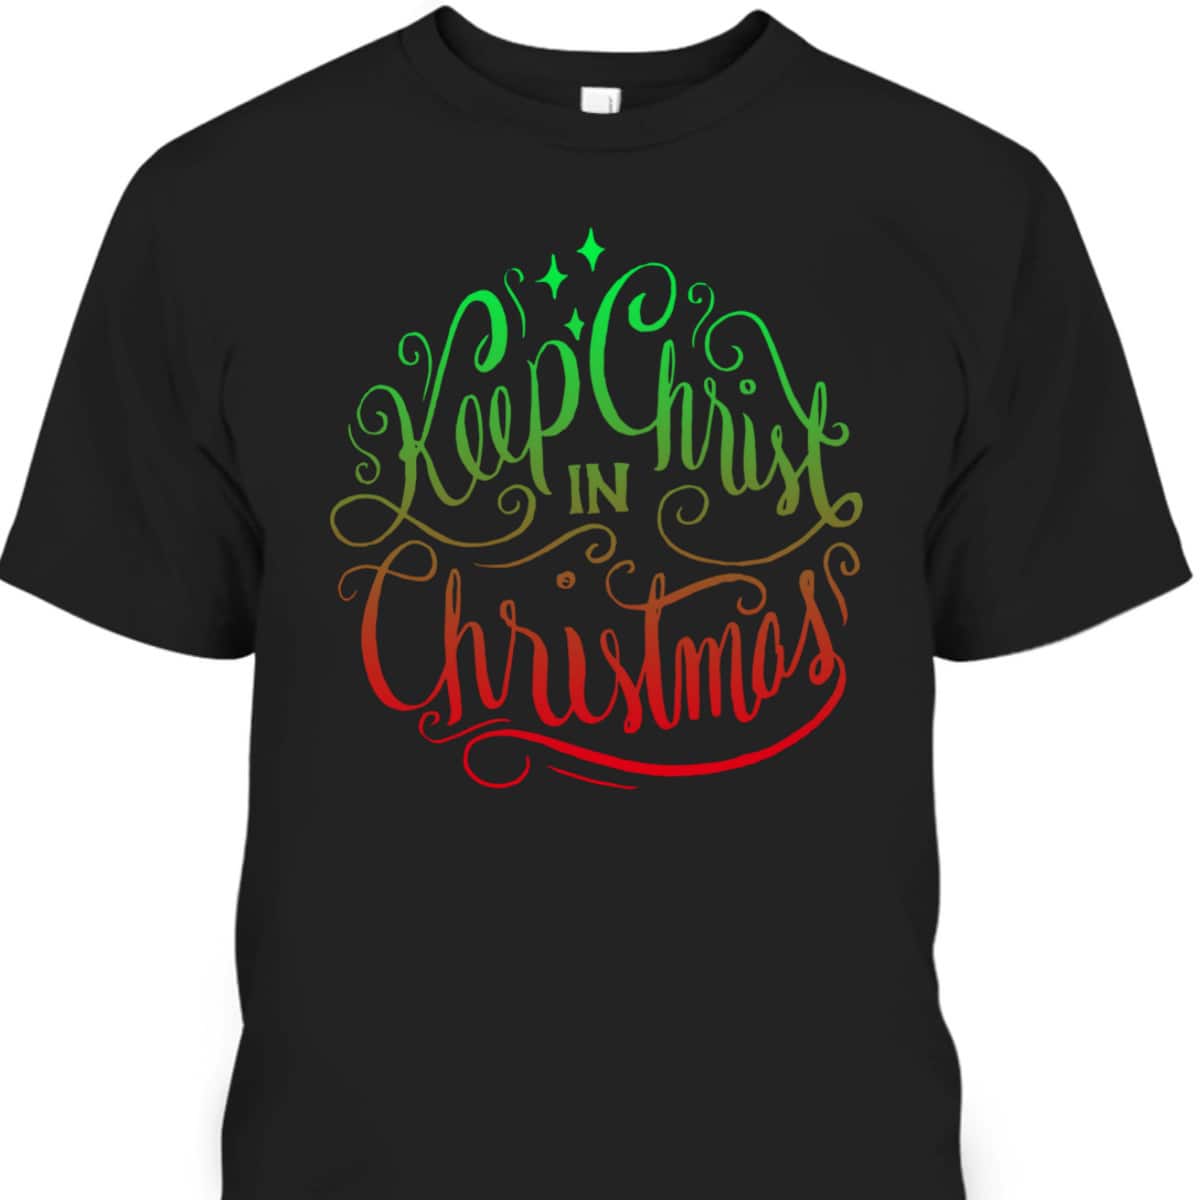 Keep Christ In Christmas Christian Holiday Quote Believer T-Shirt